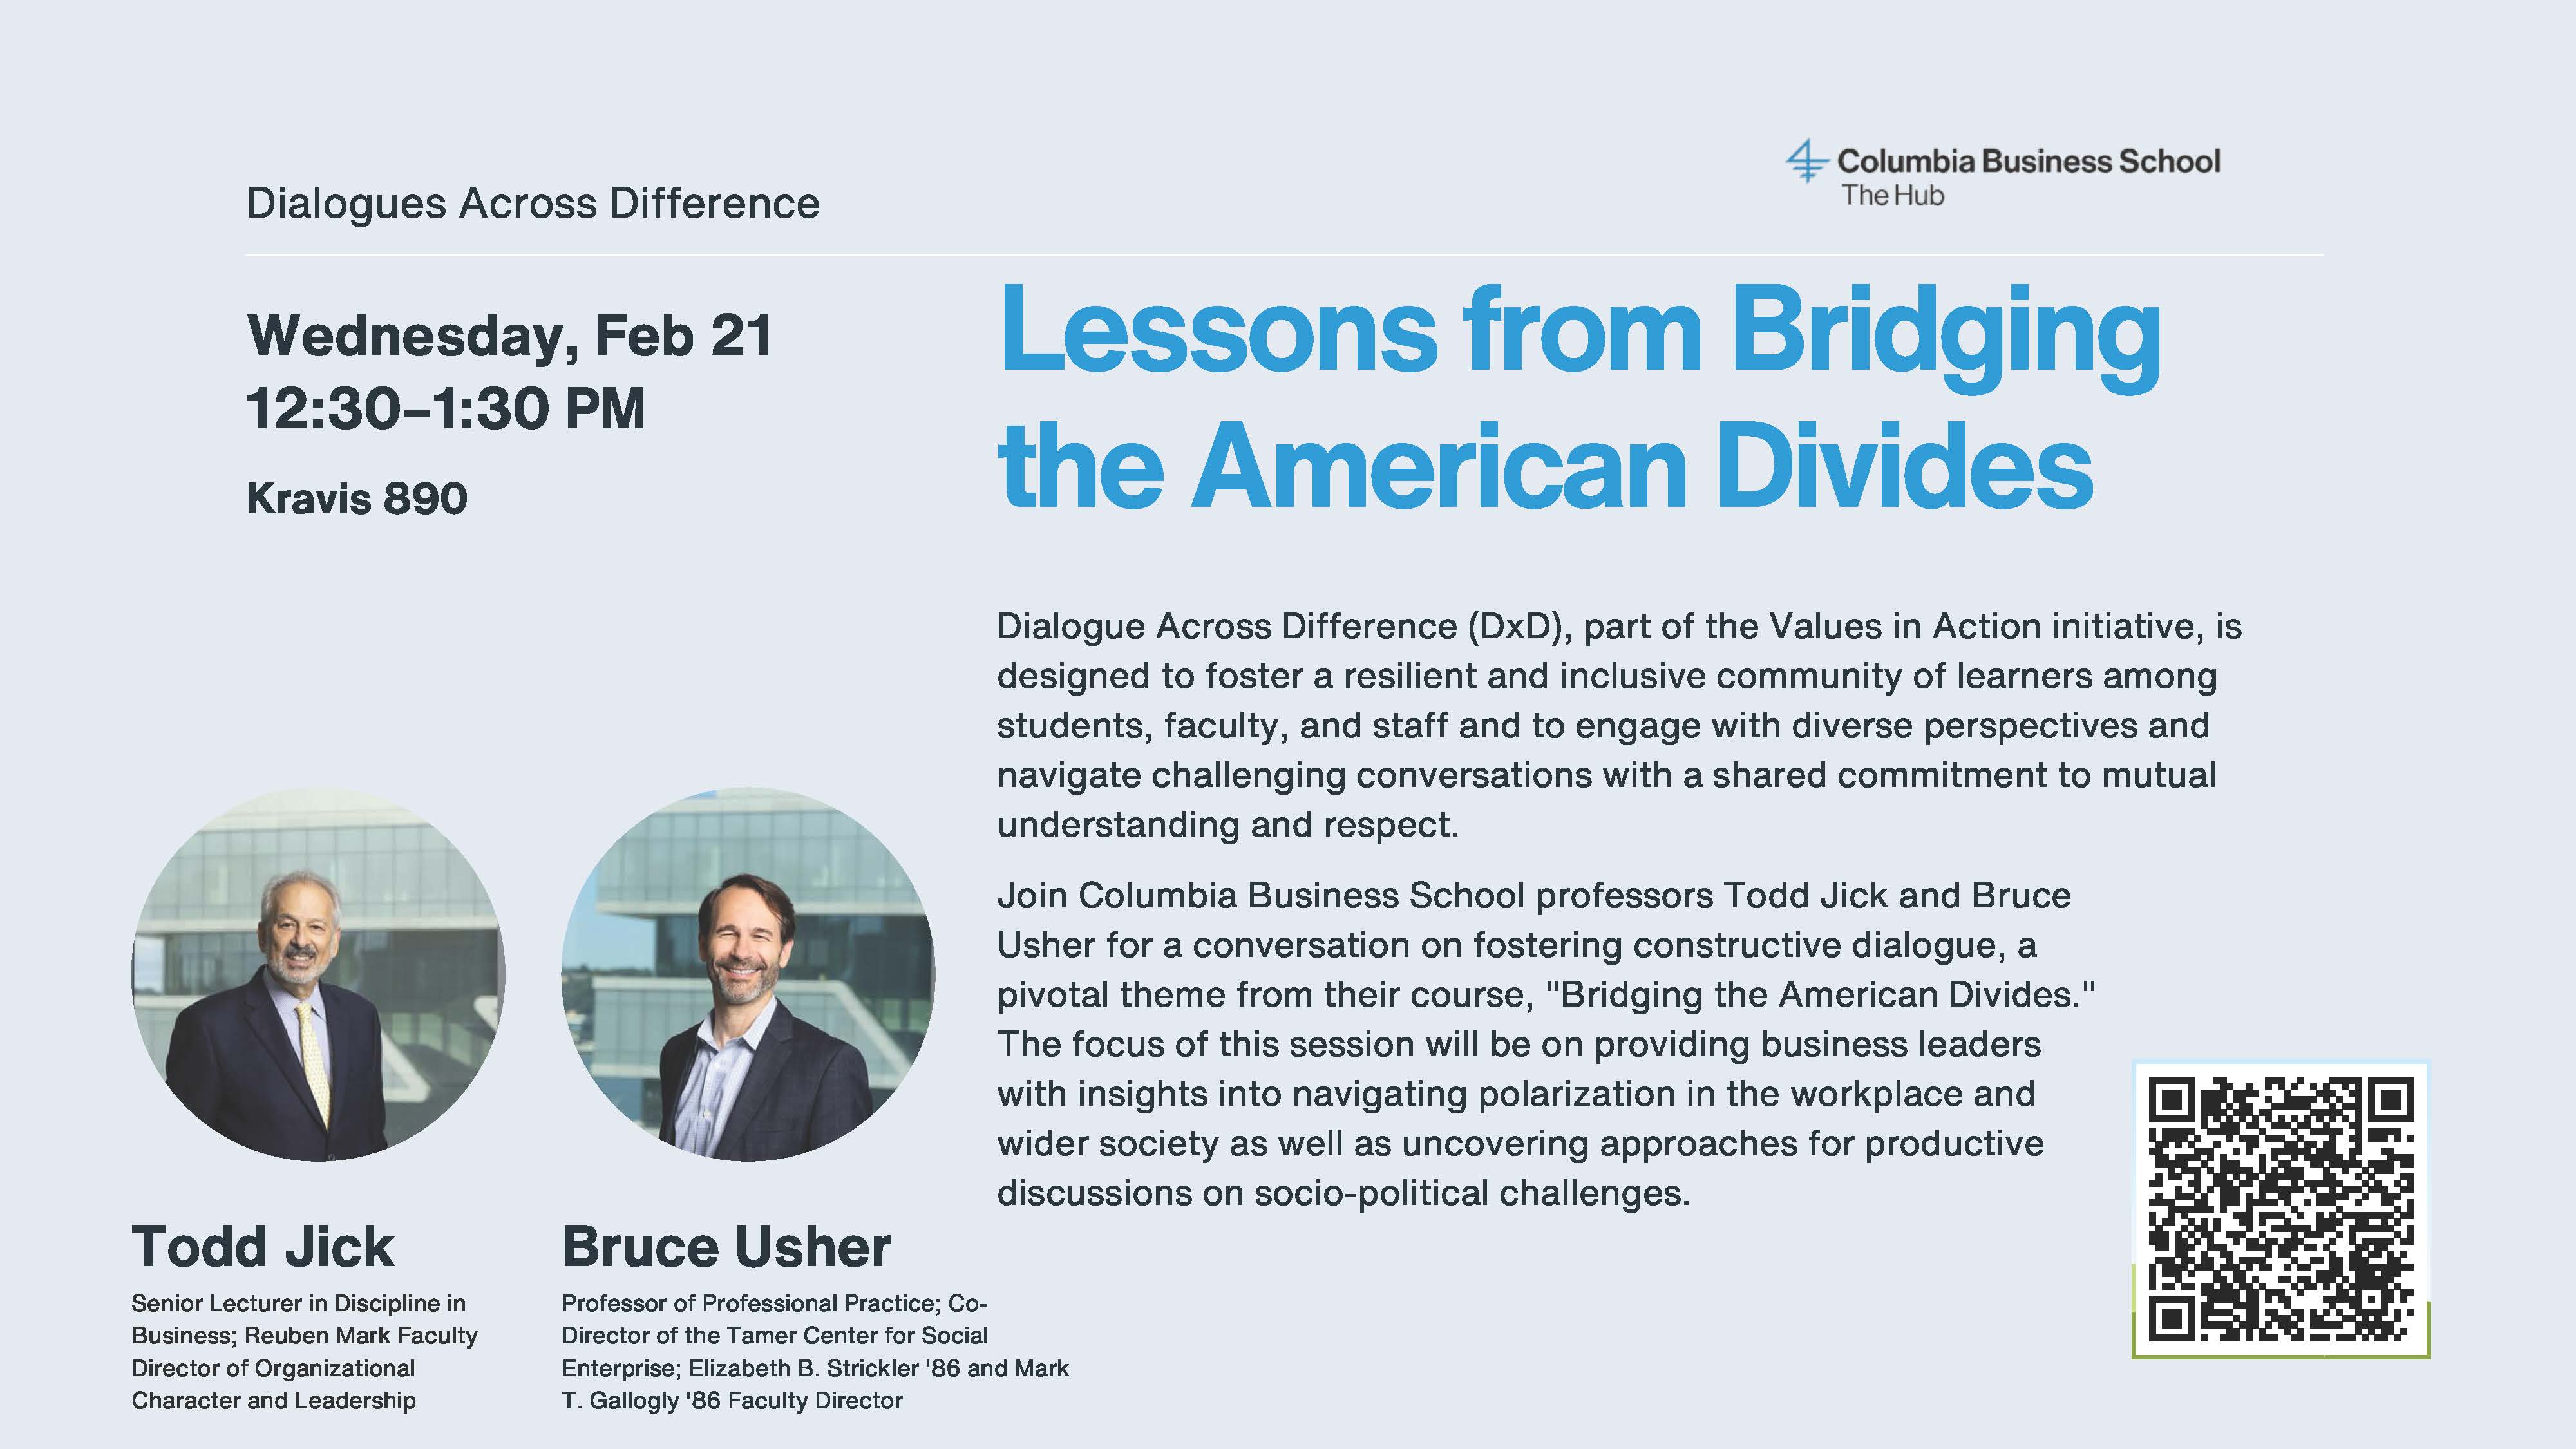 Dialogues Across Difference: Lessons From Bridging the American Divides